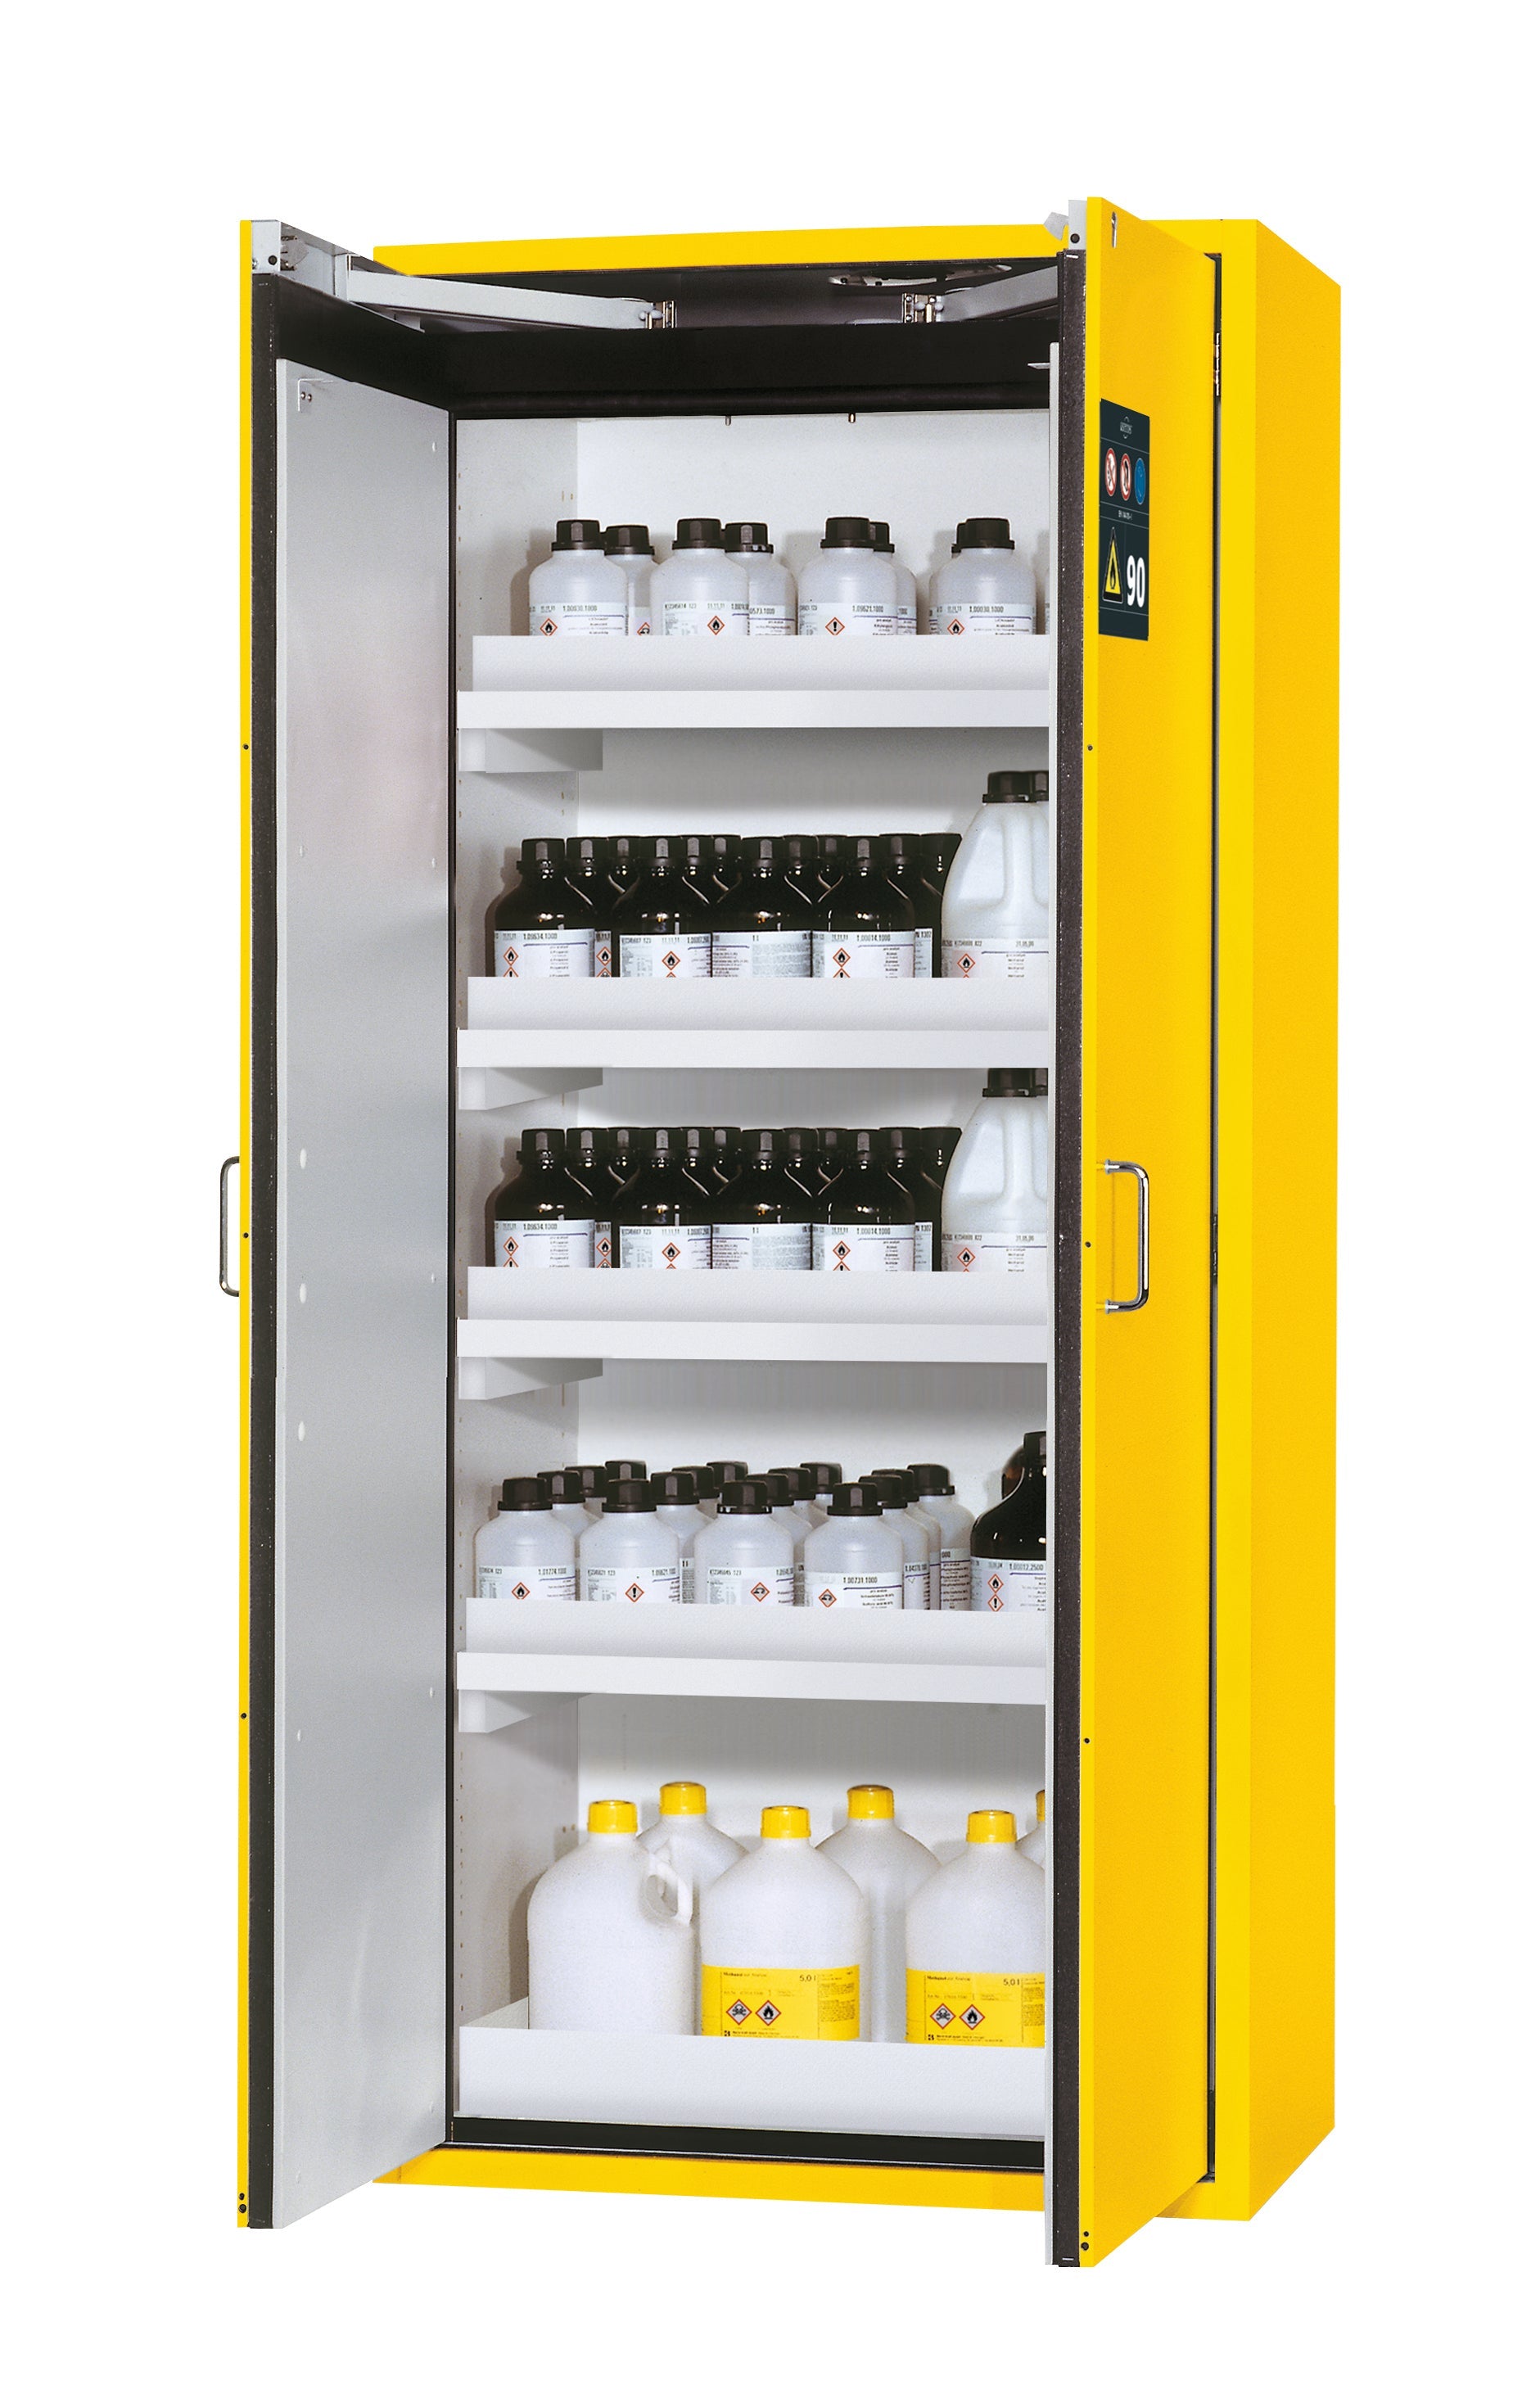 Type 90 safety cabinet S-CLASSIC-90 model S90.196.090 in safety yellow RAL 1004 with 4x standard tray base (polypropylene)